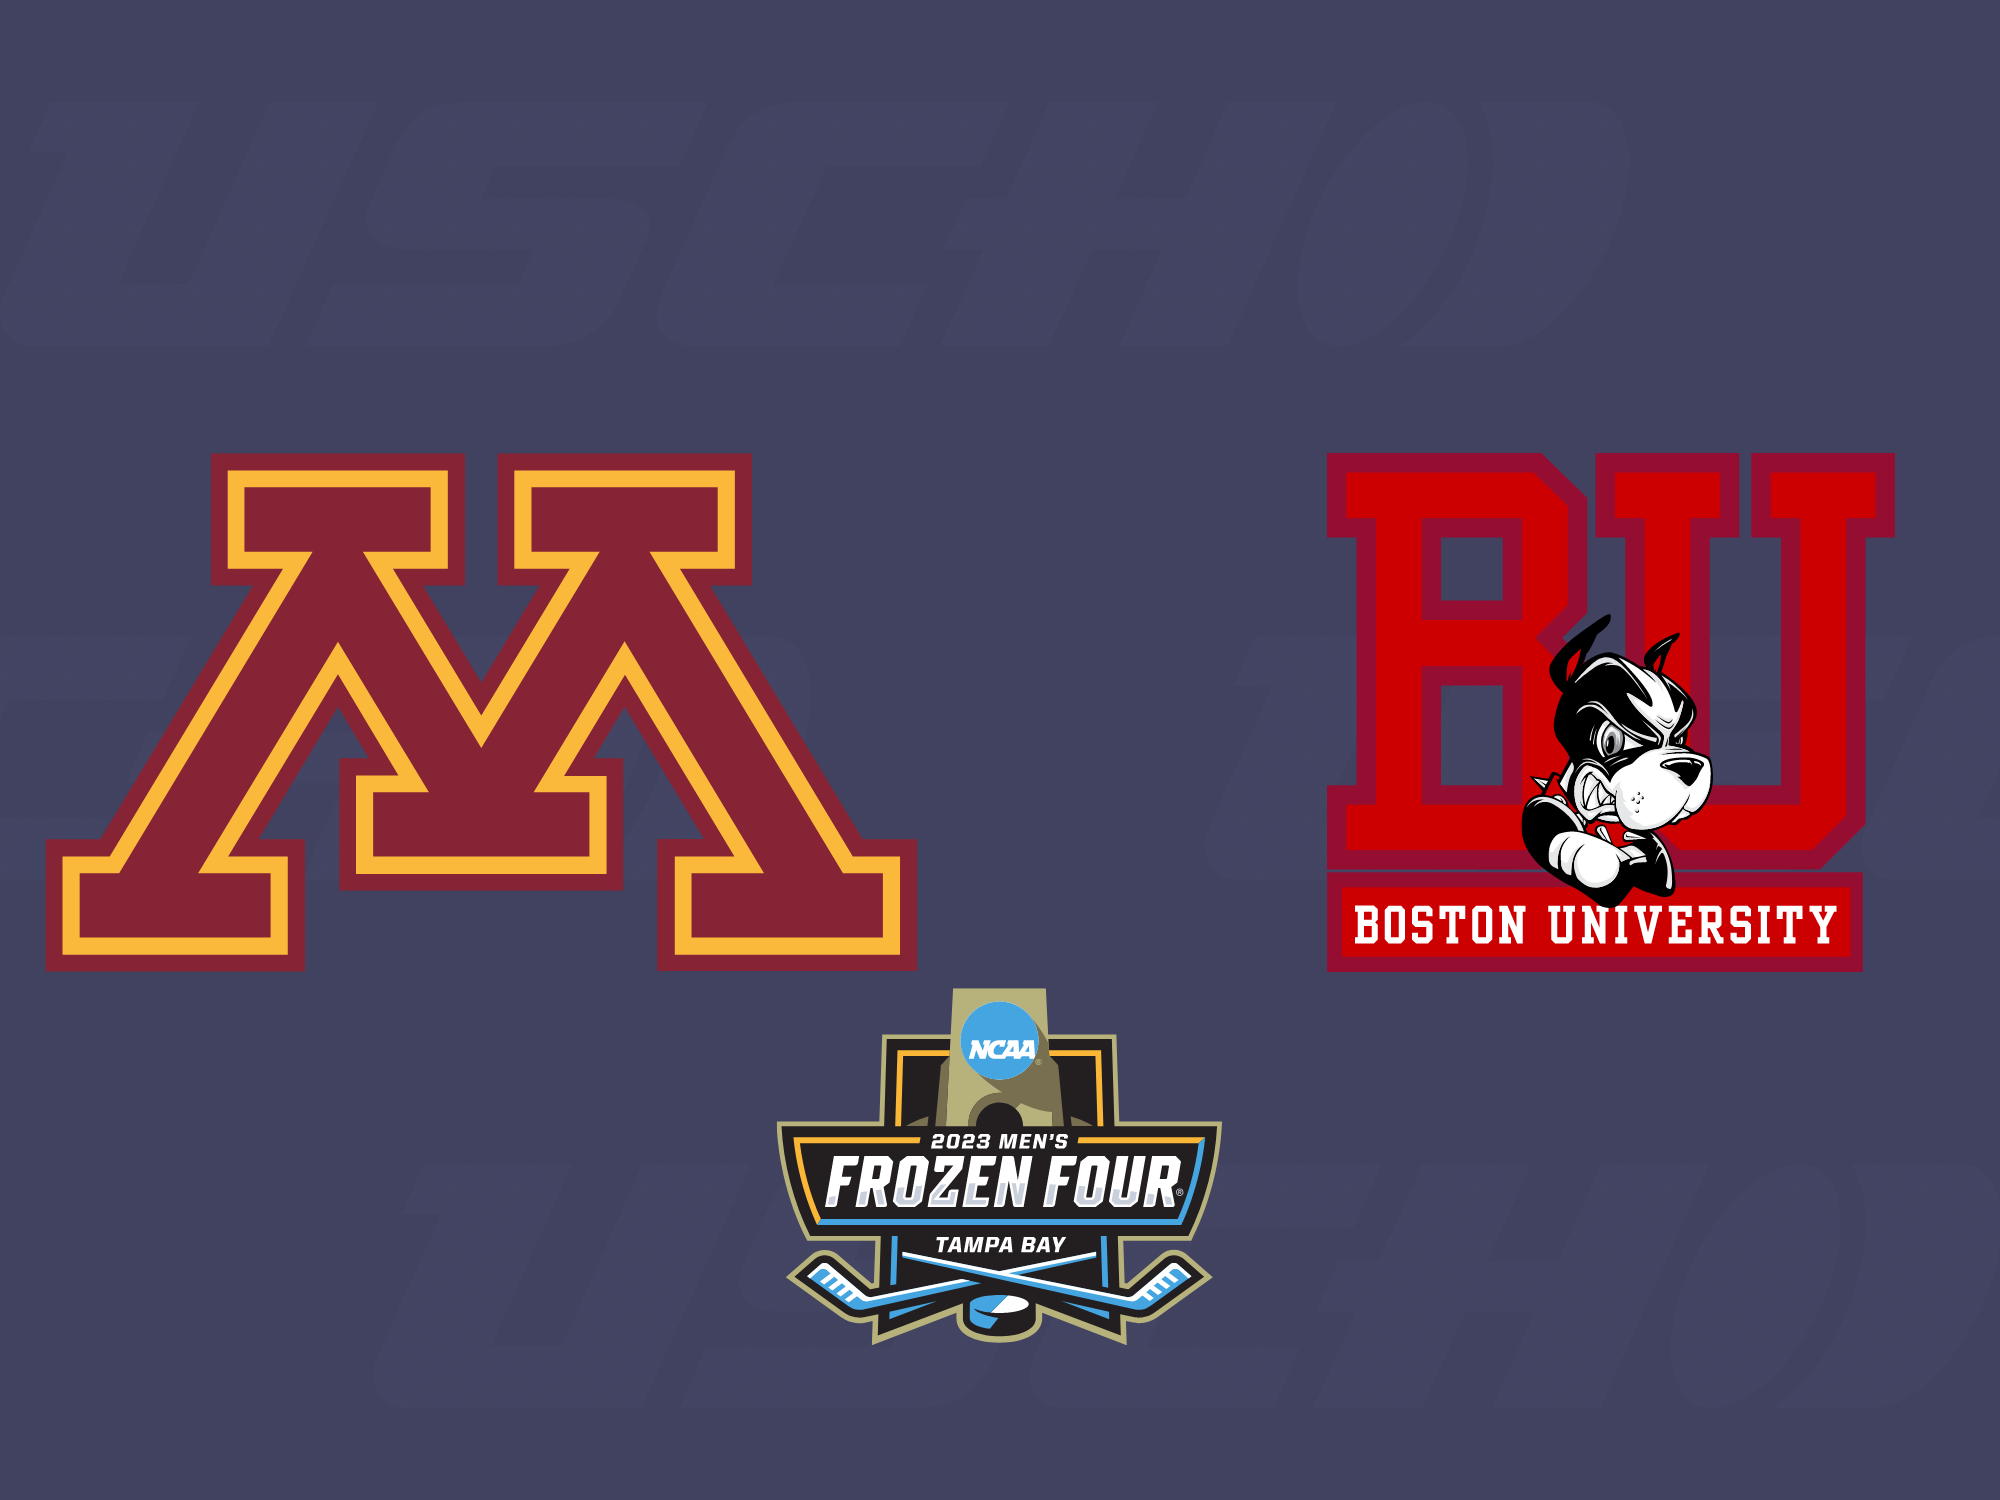 A quick analysis of Minnesota’s victory against Boston University in